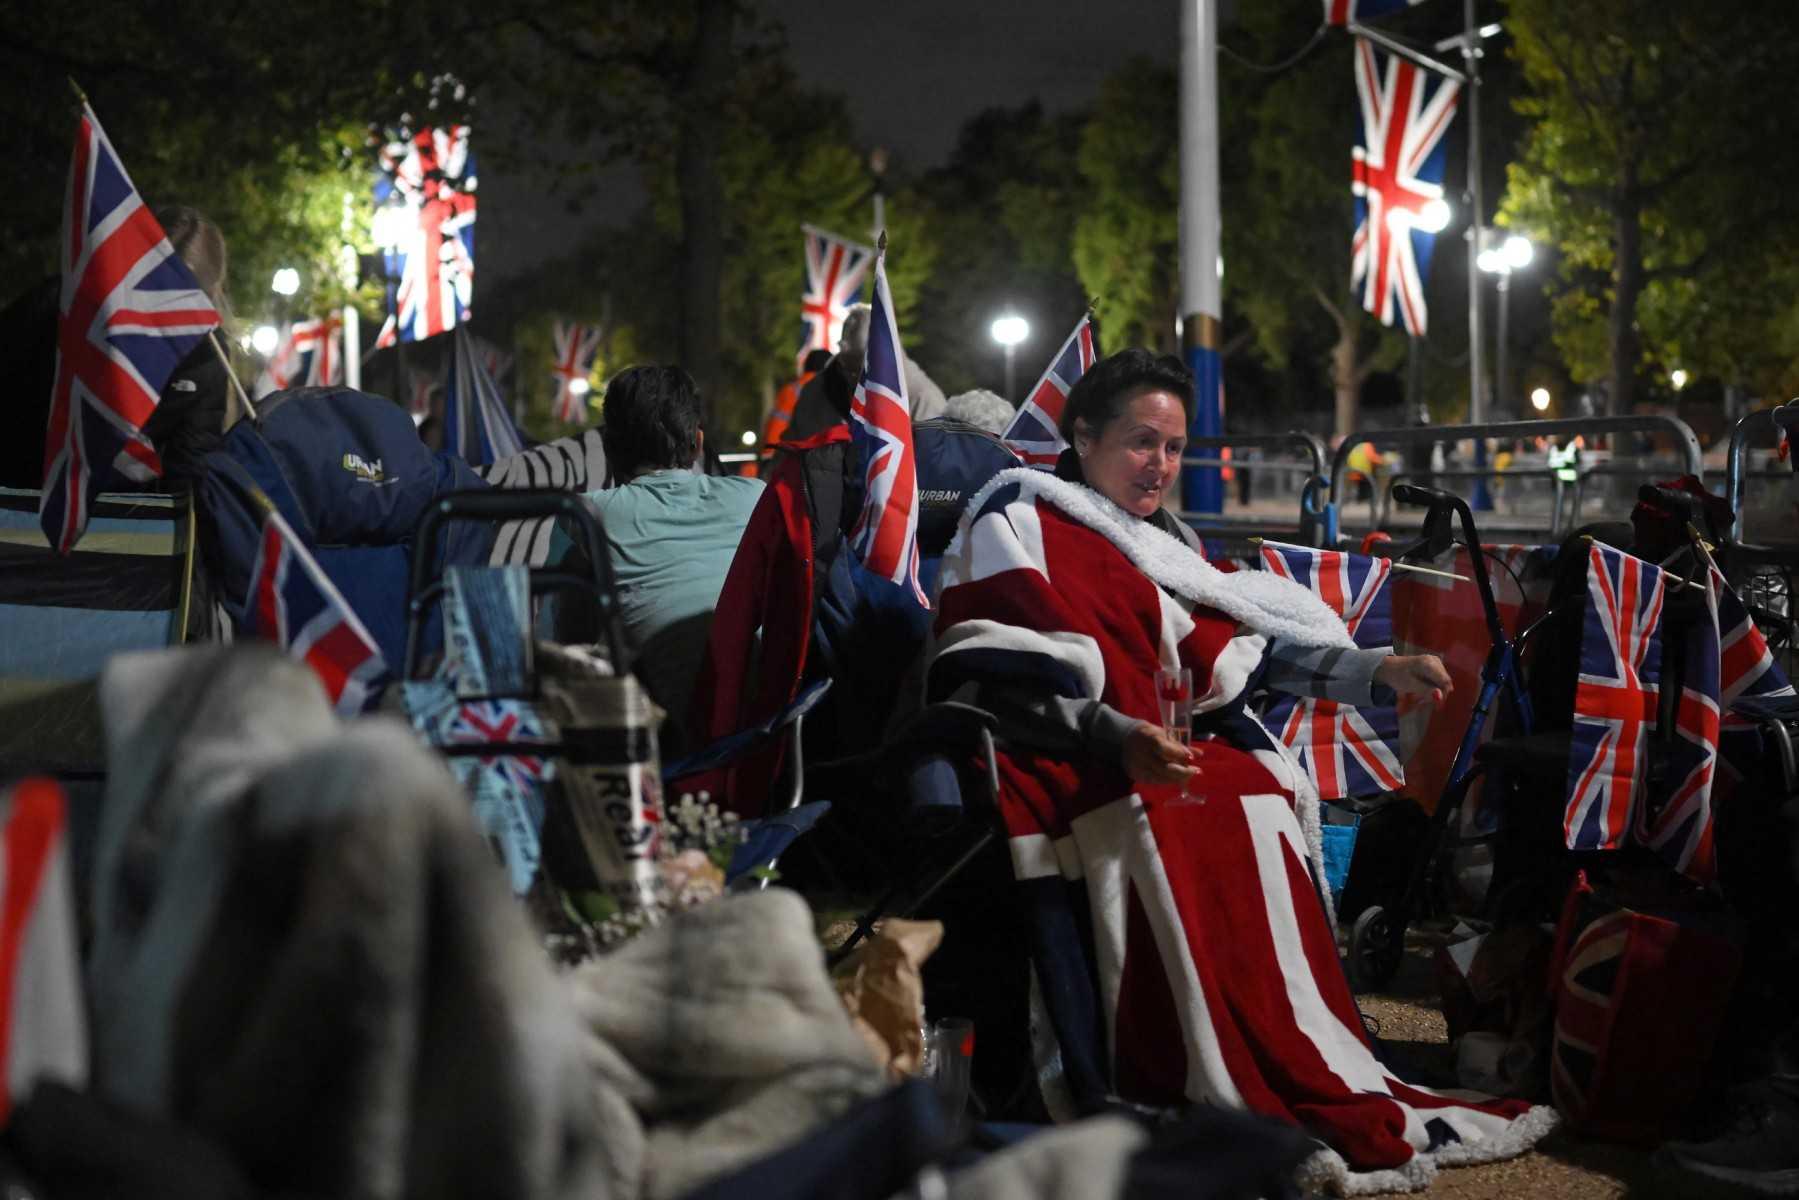 Members of the public camp behind barriers lining the procession route, ahead of the funeral of the late Queen Elizabeth II, in London on Sept 18. Photo: AFP